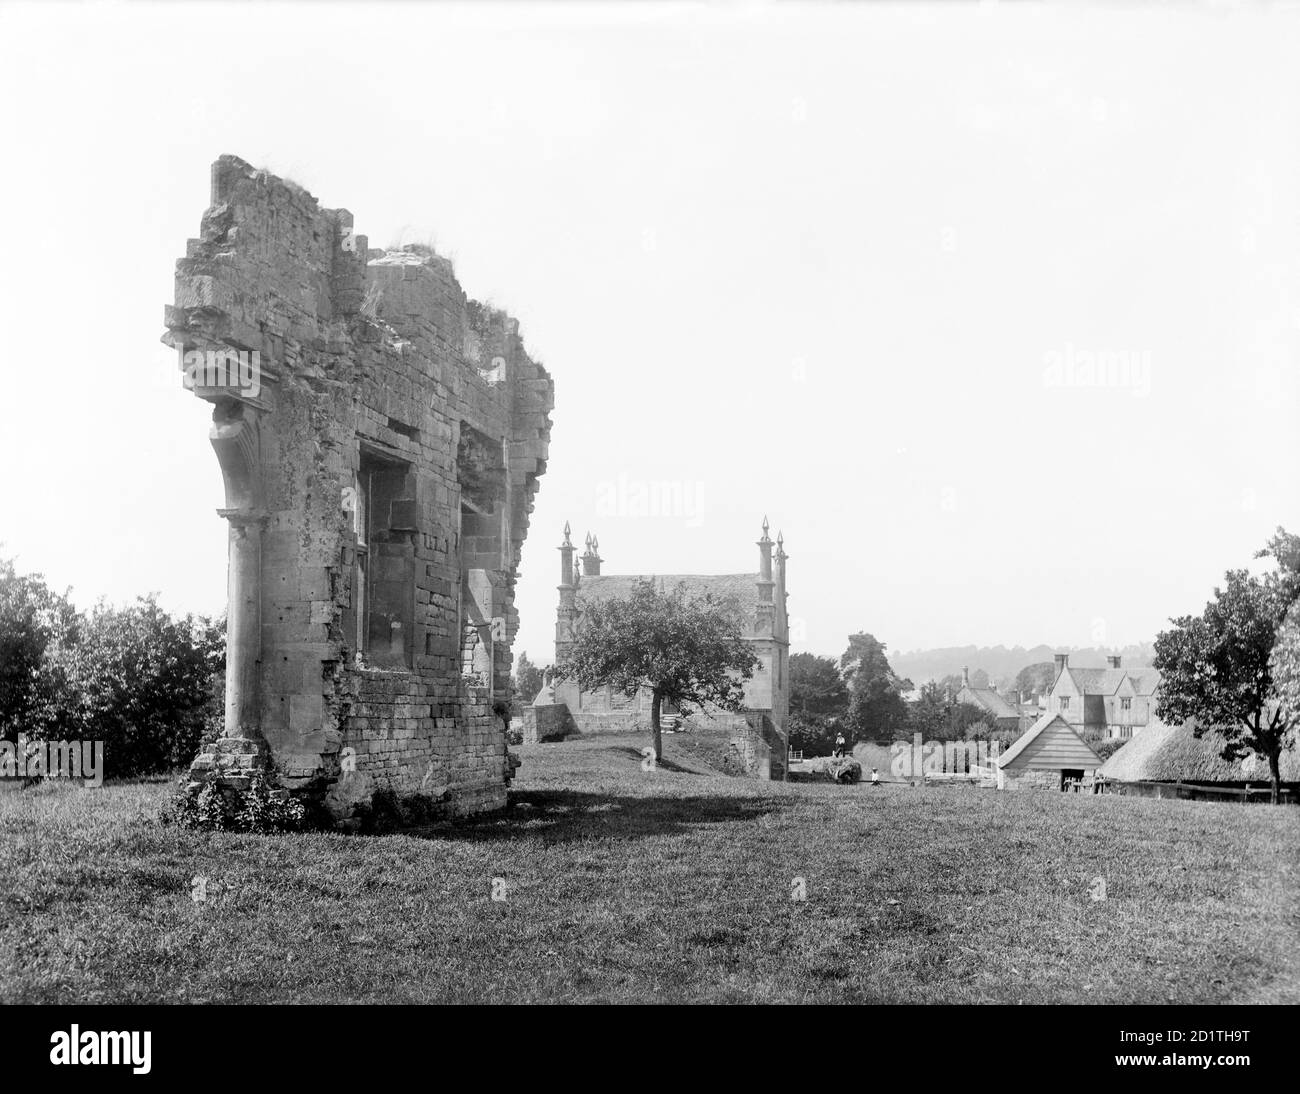 CAMPDEN HOUSE, Chipping Campden, Gloucestershire. The remains of the house of 1612, destroyed in 1645. It is an important fragment of Sir Baptist Hick's magnificent Flemish-baroque mansion of fine quality ashlar. The remains comprise part of one wall, from the west side of the south front. Photographed in 1908 by Henry Taunt. Stock Photo